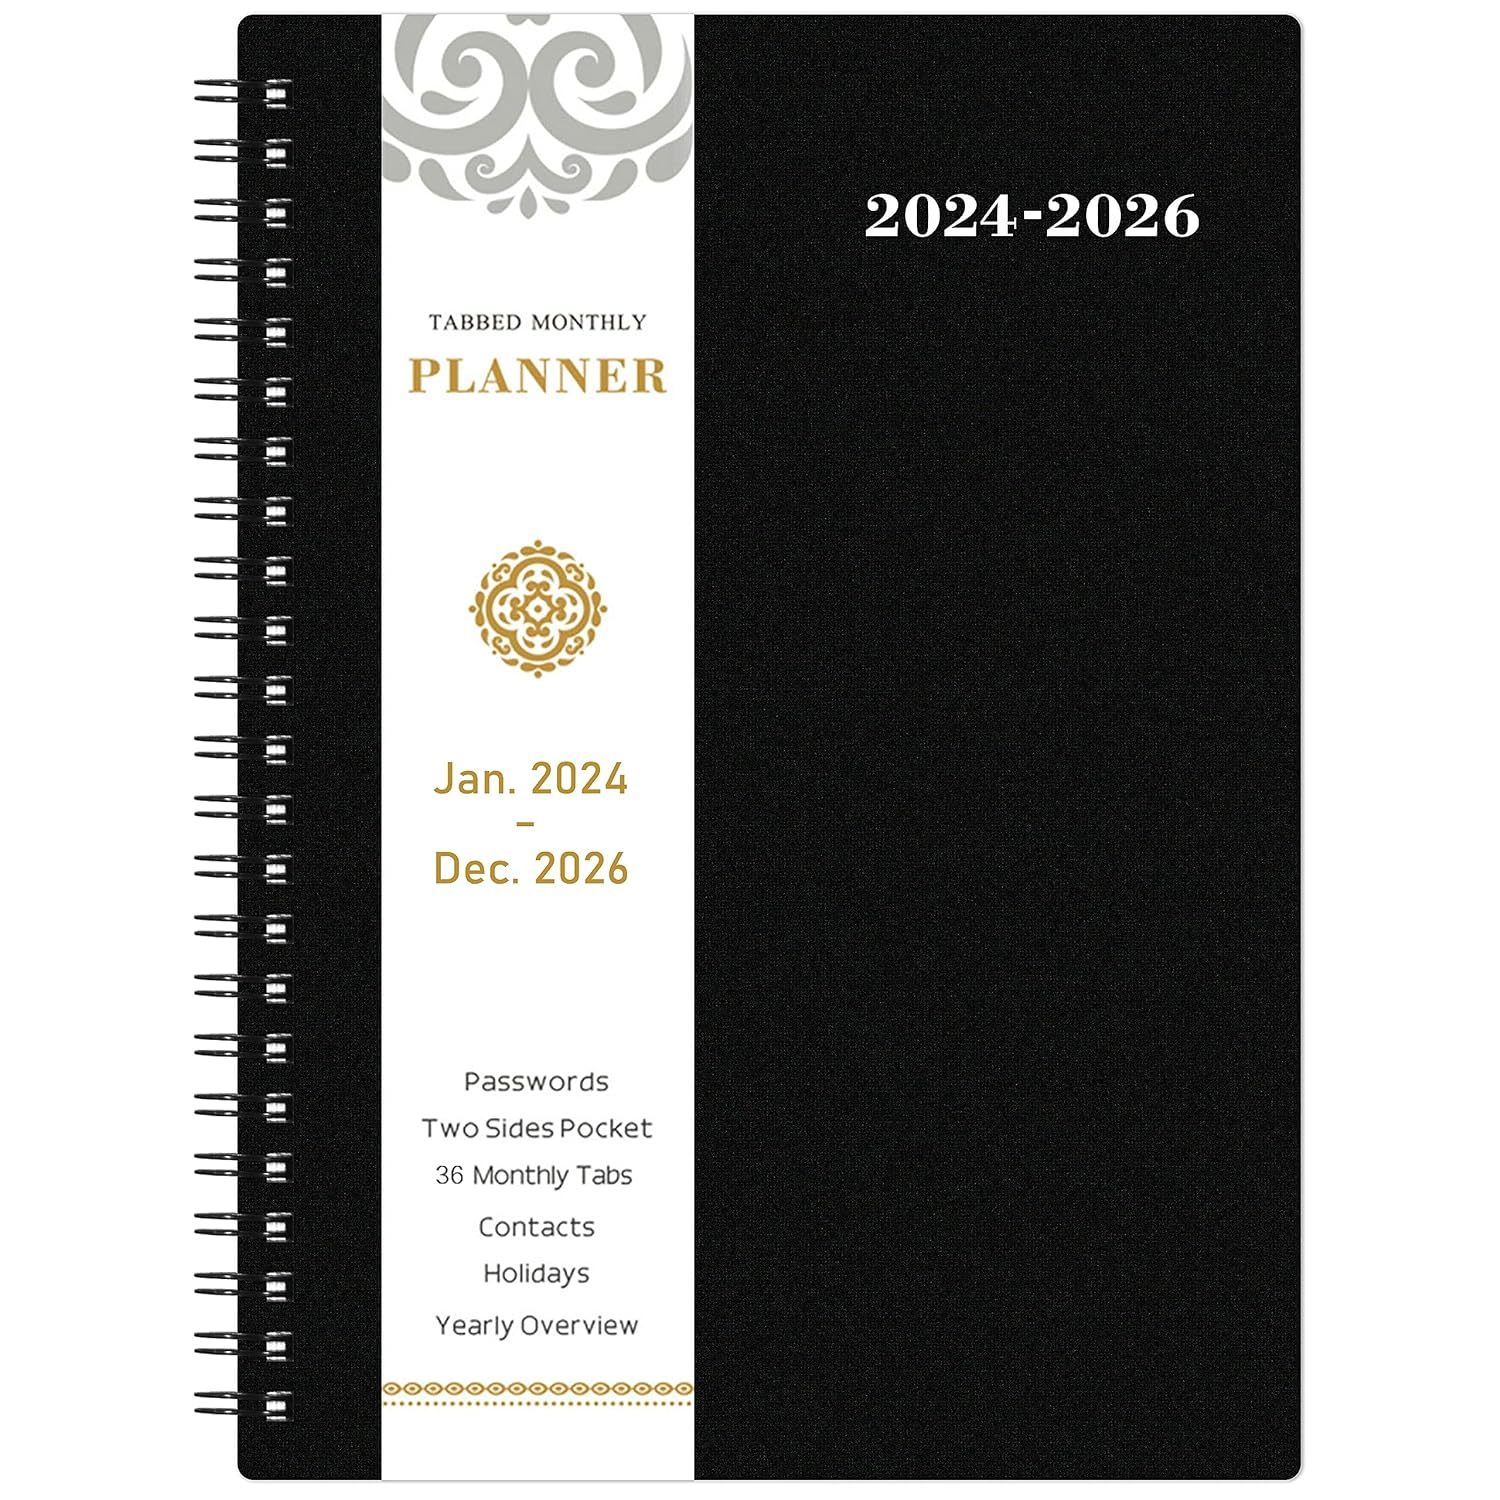 Primary image for 2024-2026 Monthly Planner/Monthly Calendar - 3 Year Monthly Planner 2024-2026, 3